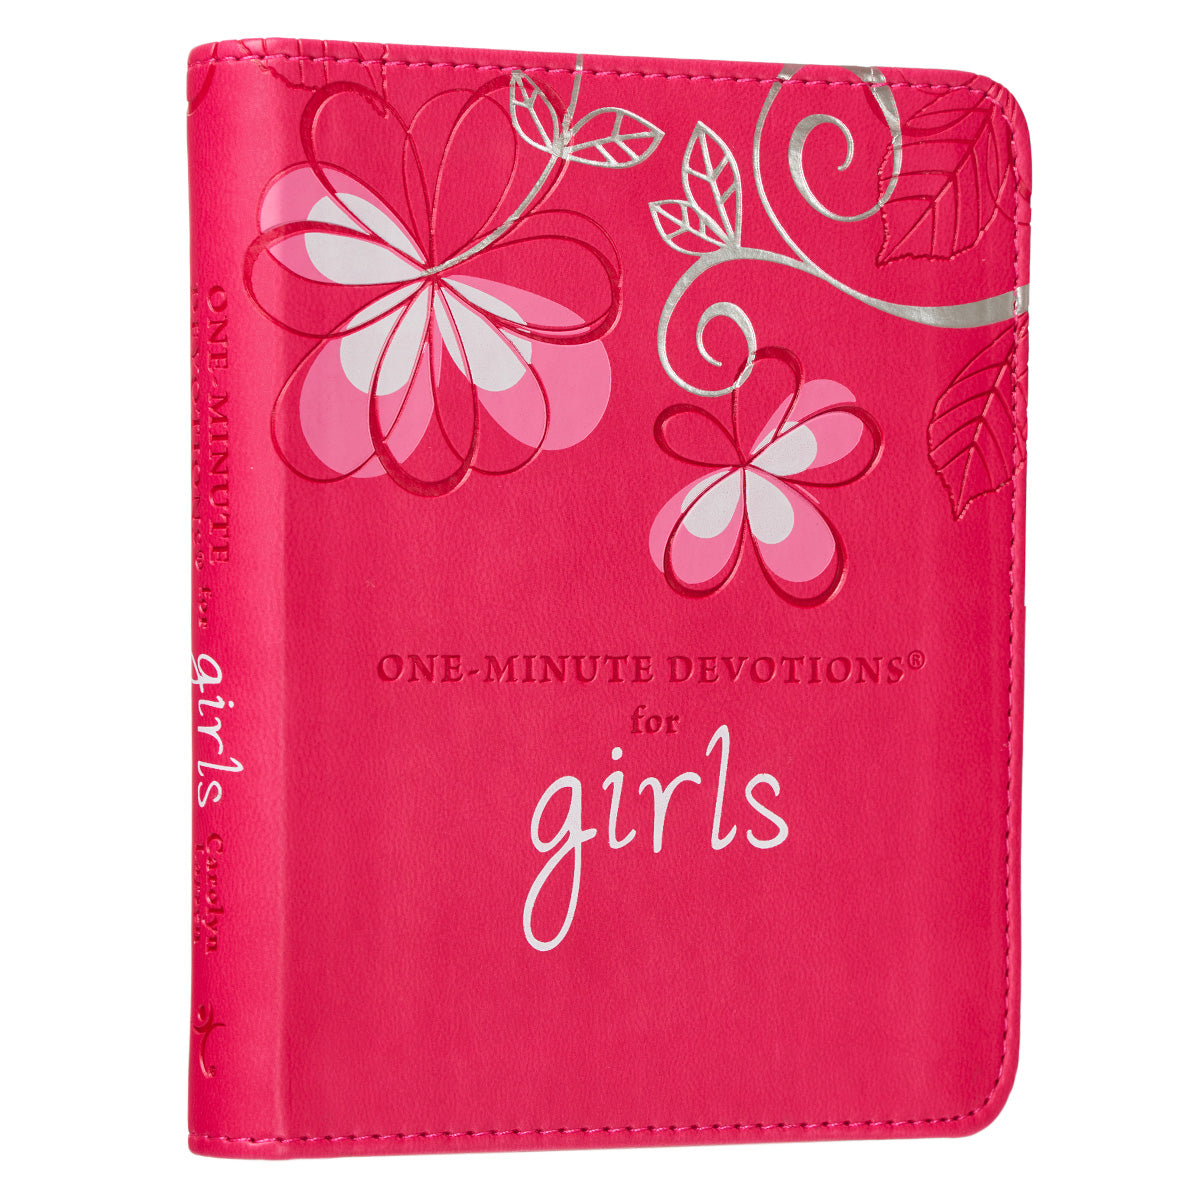 The One-Minute Devotions for Girls Pink Faux Leather Devotional - The Christian Gift Company